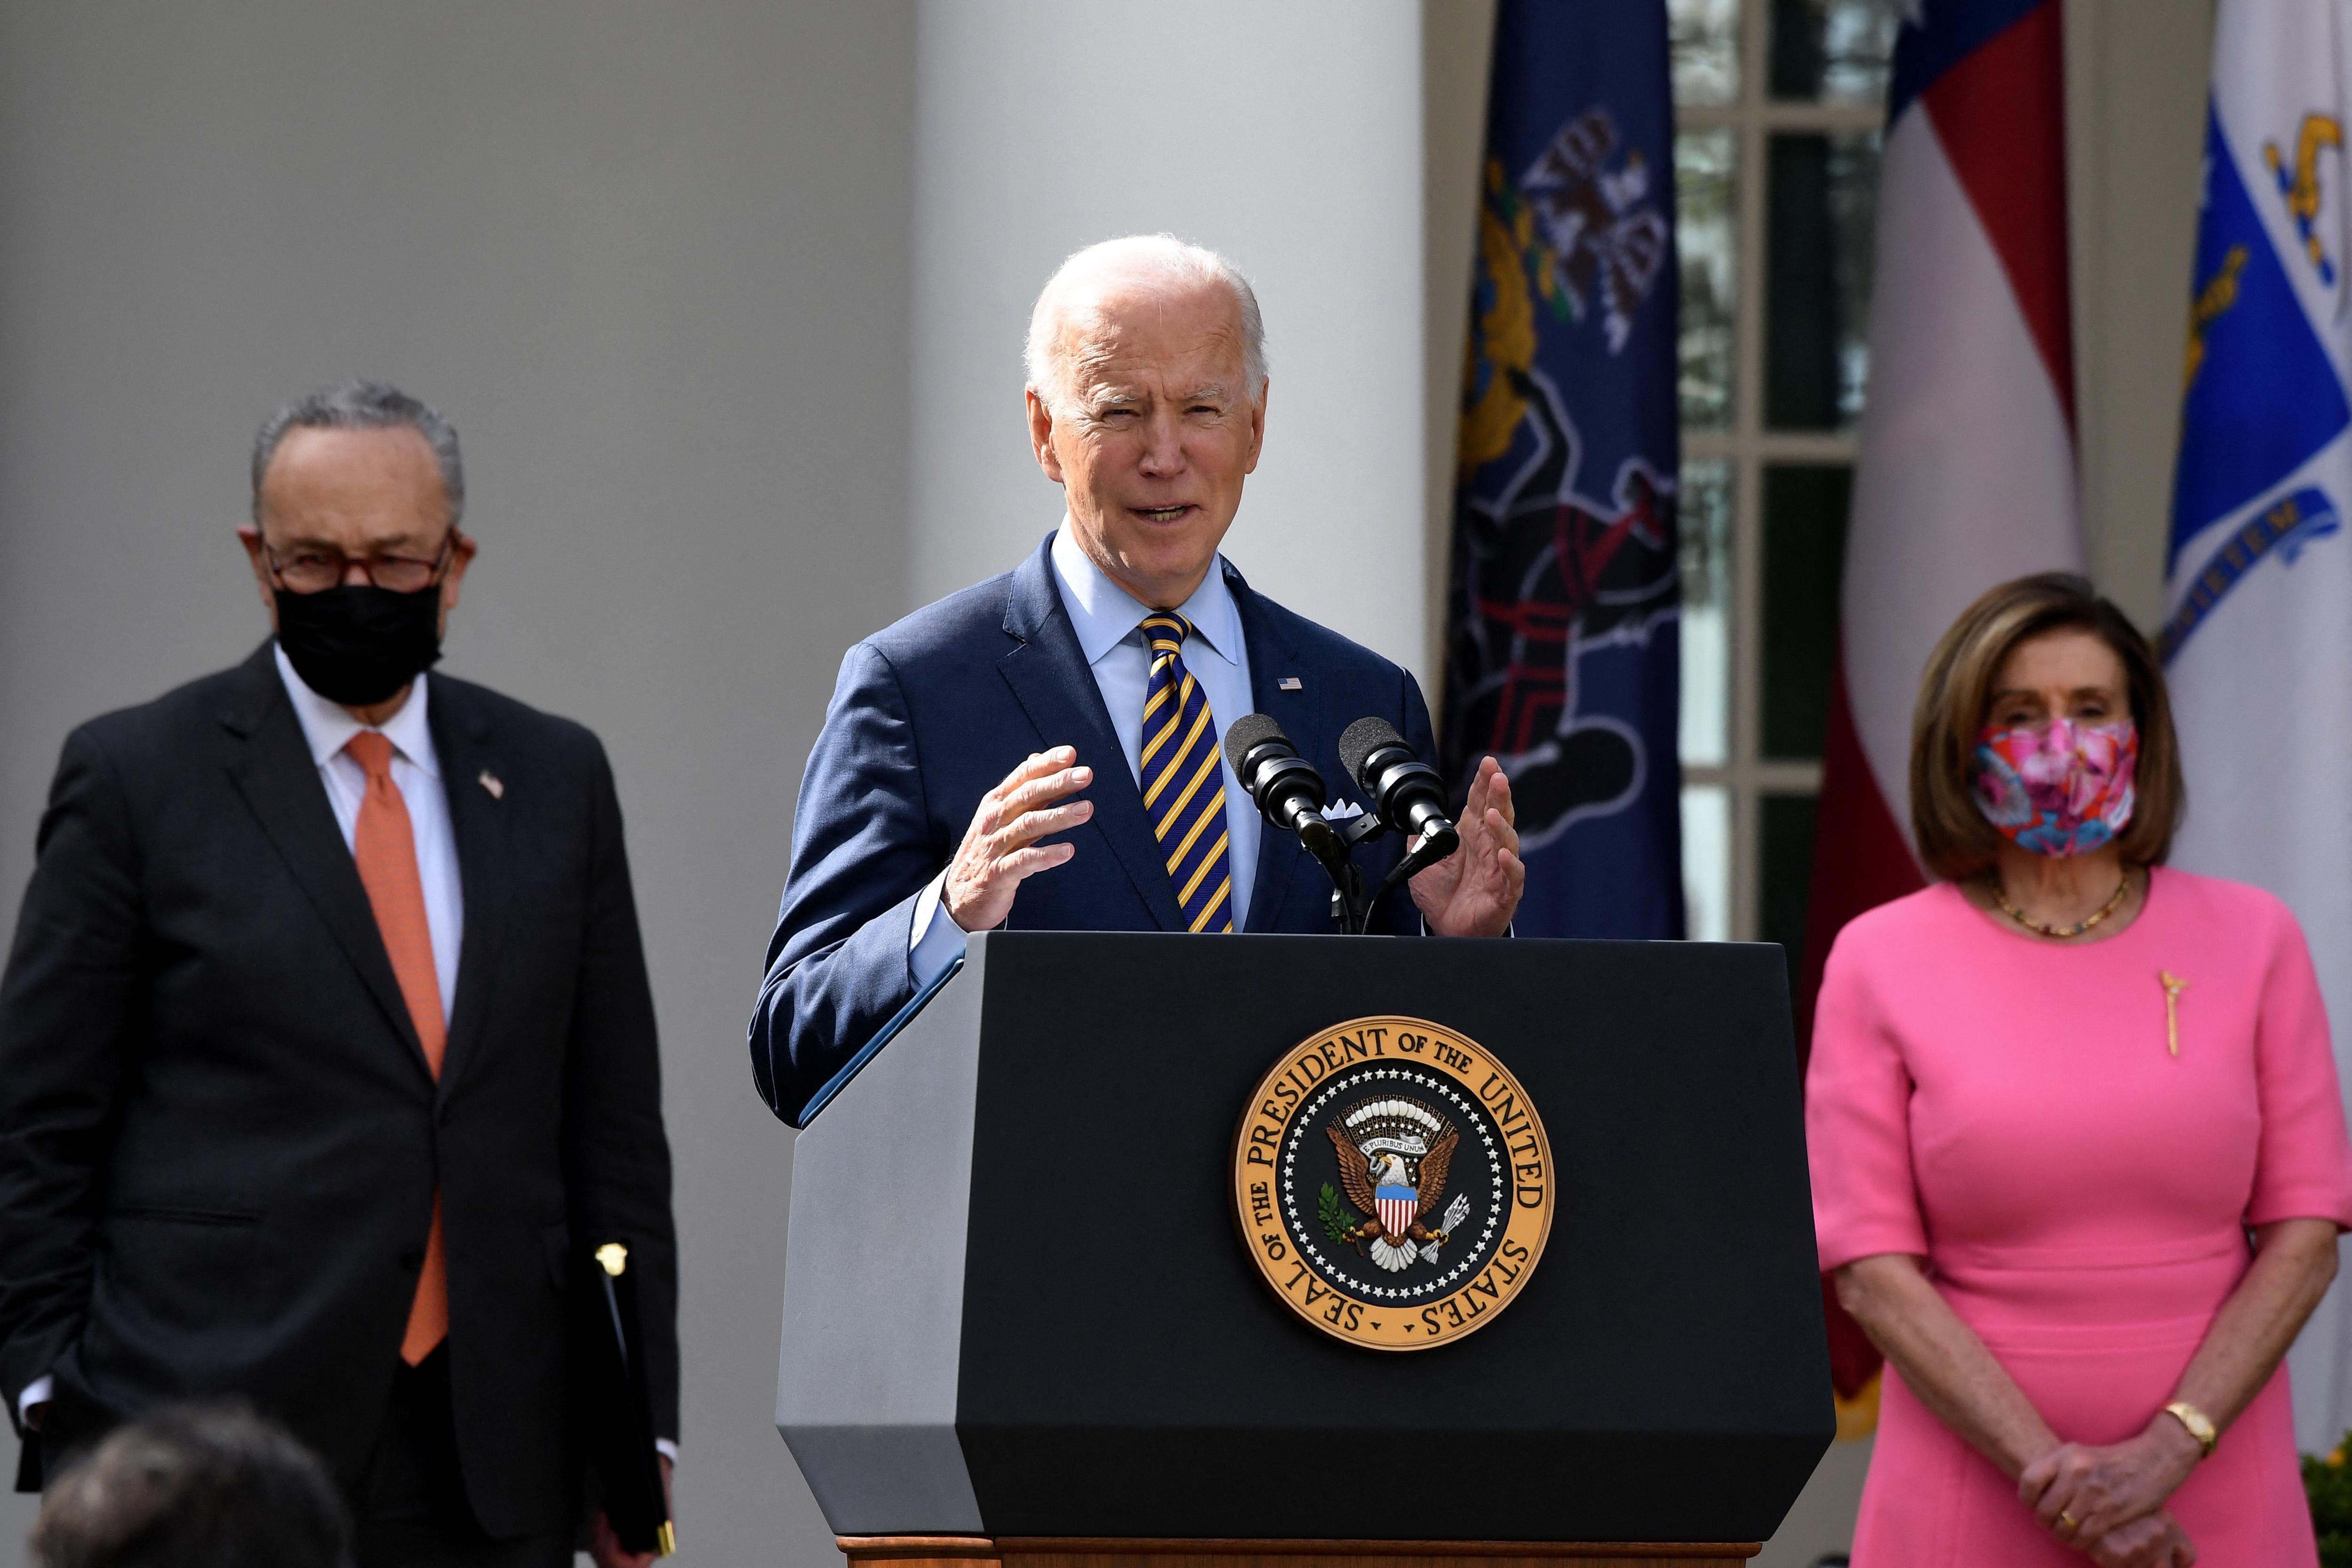 Joe Biden speaks as Chuck Schumer and Nancy Pelosi look on at an event in the White House Rose Garden. 